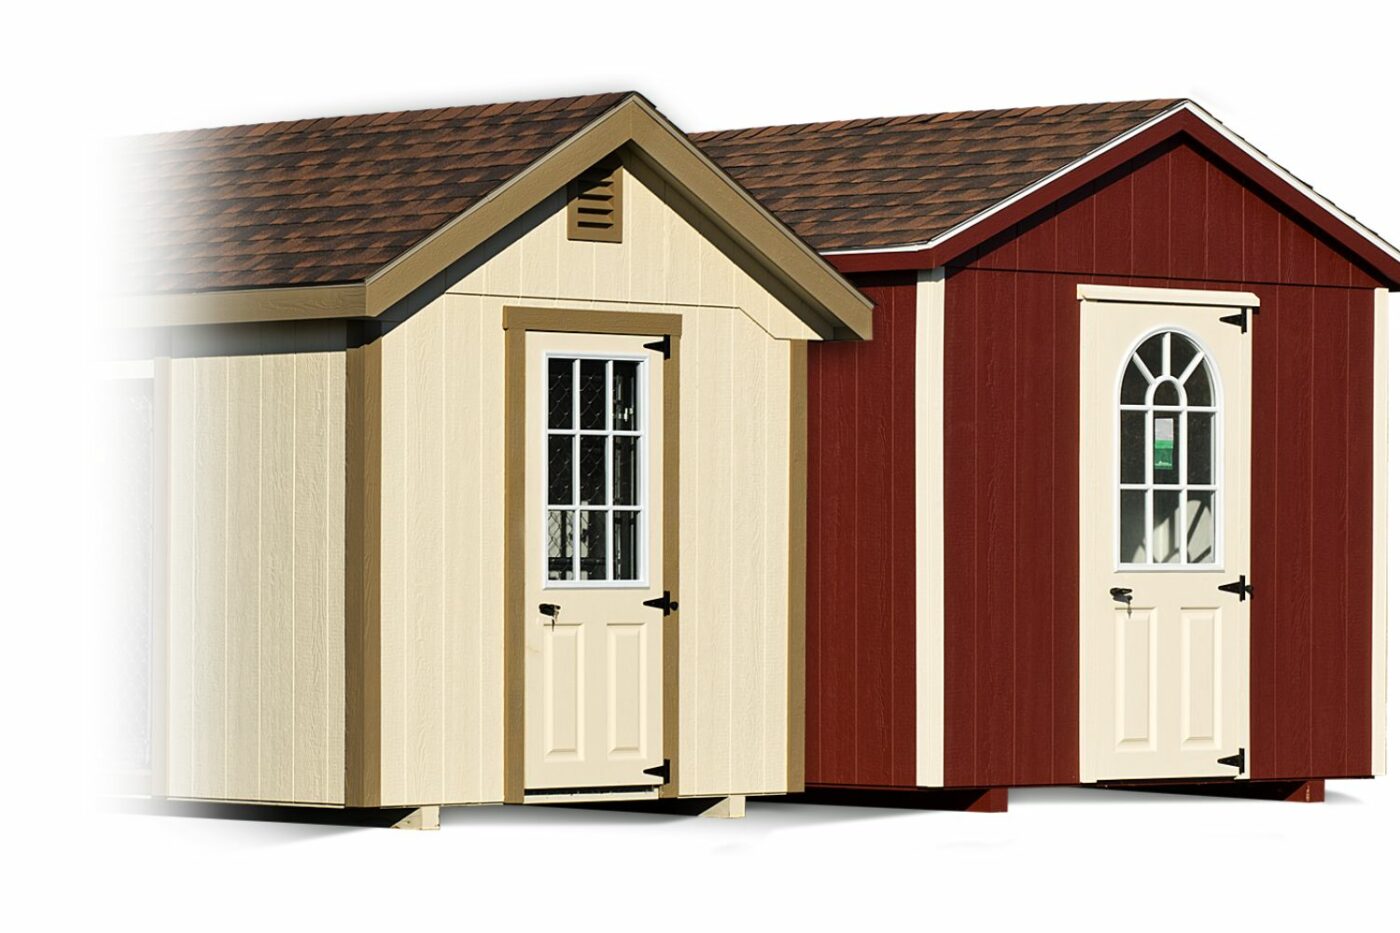 trim options - dog kennel siding and roofing 